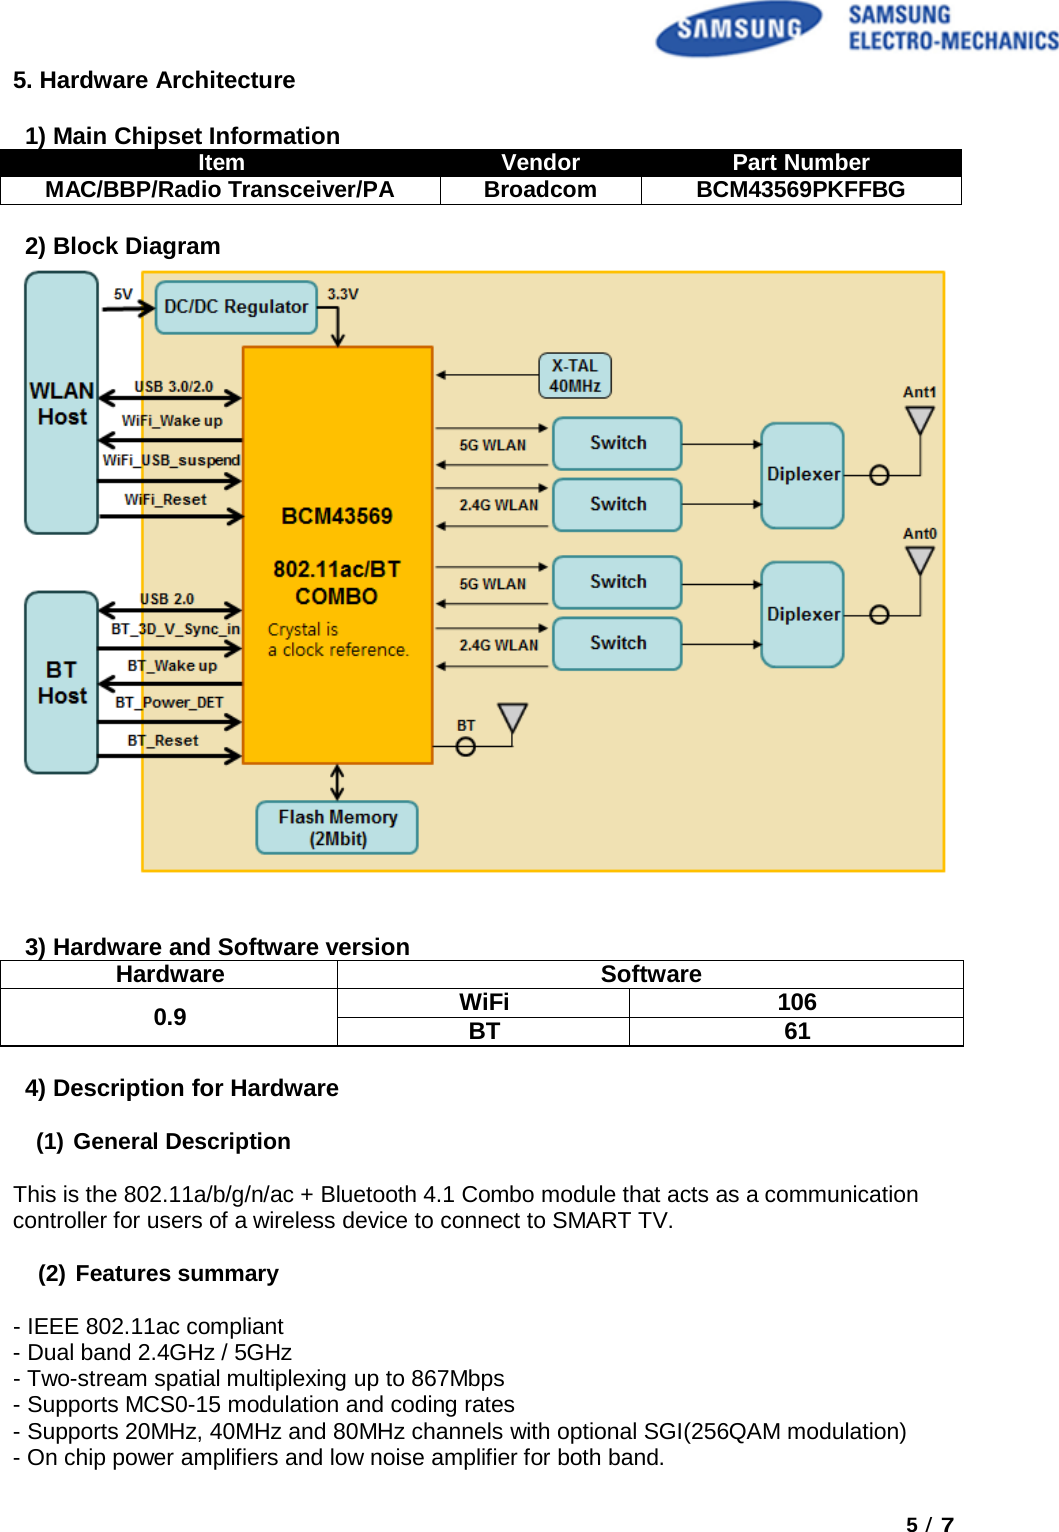    5. Hardware Architecture  1) Main Chipset Information Item Vendor Part Number MAC/BBP/Radio Transceiver/PA Broadcom BCM43569PKFFBG  2) Block Diagram     3) Hardware and Software version Hardware Software  0.9 WiFi 106 BT 61  4) Description for Hardware  (1) General Description  This is the 802.11a/b/g/n/ac + Bluetooth 4.1 Combo module that acts as a communication controller for users of a wireless device to connect to SMART TV.  (2) Features summary  - IEEE 802.11ac compliant - Dual band 2.4GHz / 5GHz - Two-stream spatial multiplexing up to 867Mbps - Supports MCS0-15 modulation and coding rates - Supports 20MHz, 40MHz and 80MHz channels with optional SGI(256QAM modulation) - On chip power amplifiers and low noise amplifier for both band. 5 / 7  